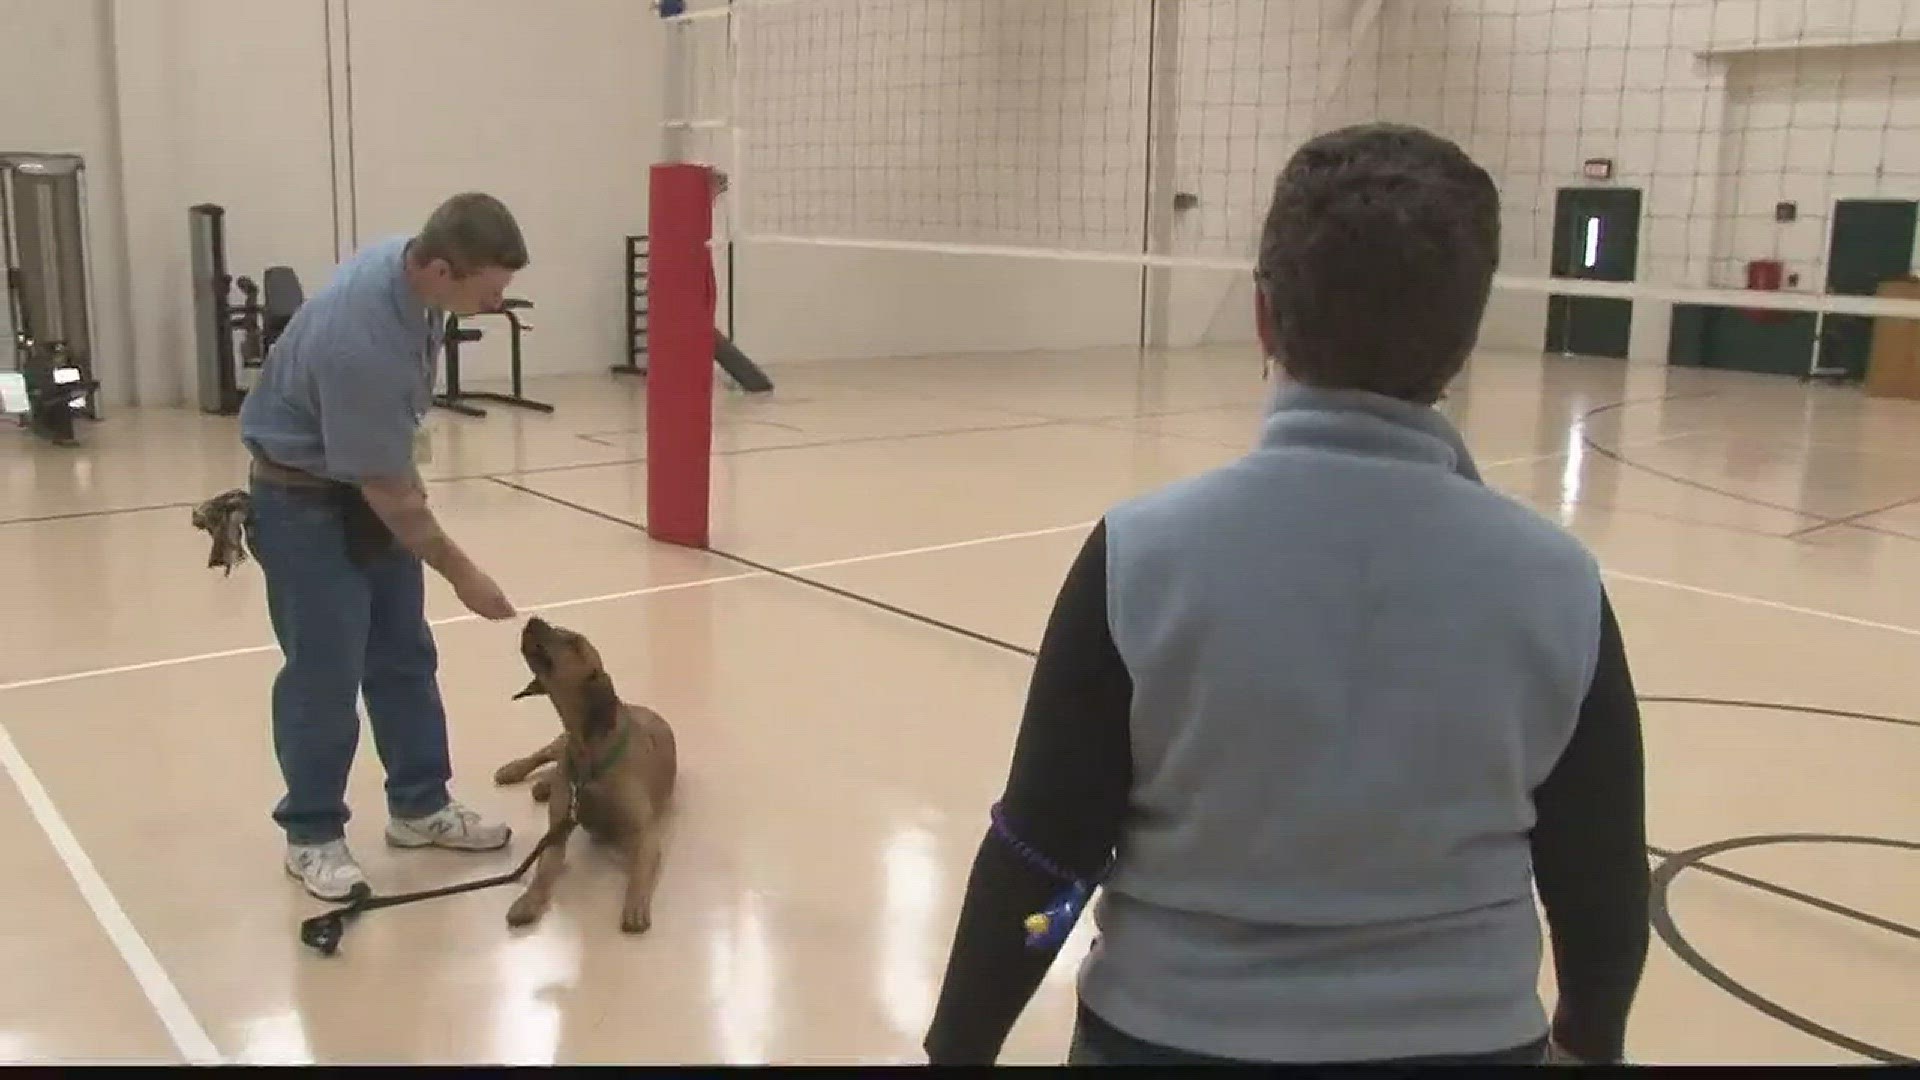 More than 100 dogs have successfully finished the K9 Corrections program at the Maine State Prison thanks to the inmates who spend six to eight weeks working with the animals.